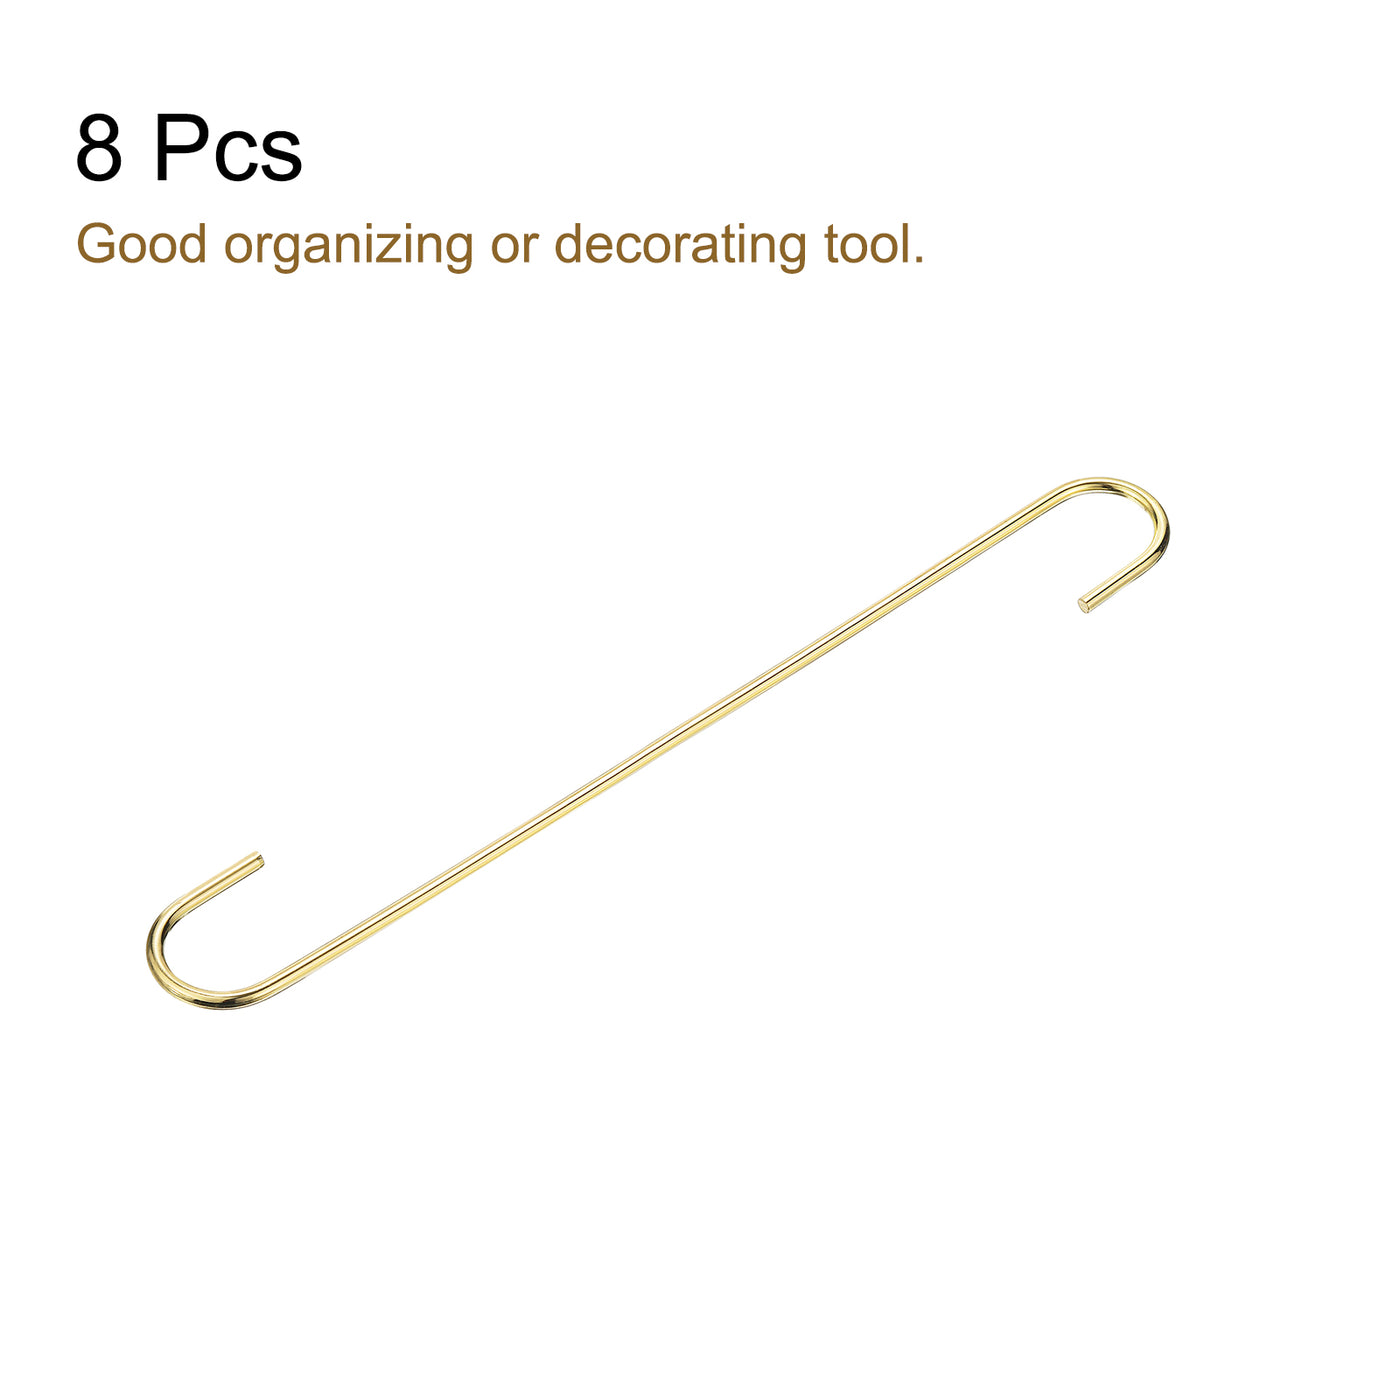 uxcell Uxcell S Hanging Hooks, 12inch(300mm) Extra Long Steel Hanger, Indoor Outdoor Uses for Garden, Bathroom, Closet, Workshop, Kitchen, Gold Tone, 8Pcs